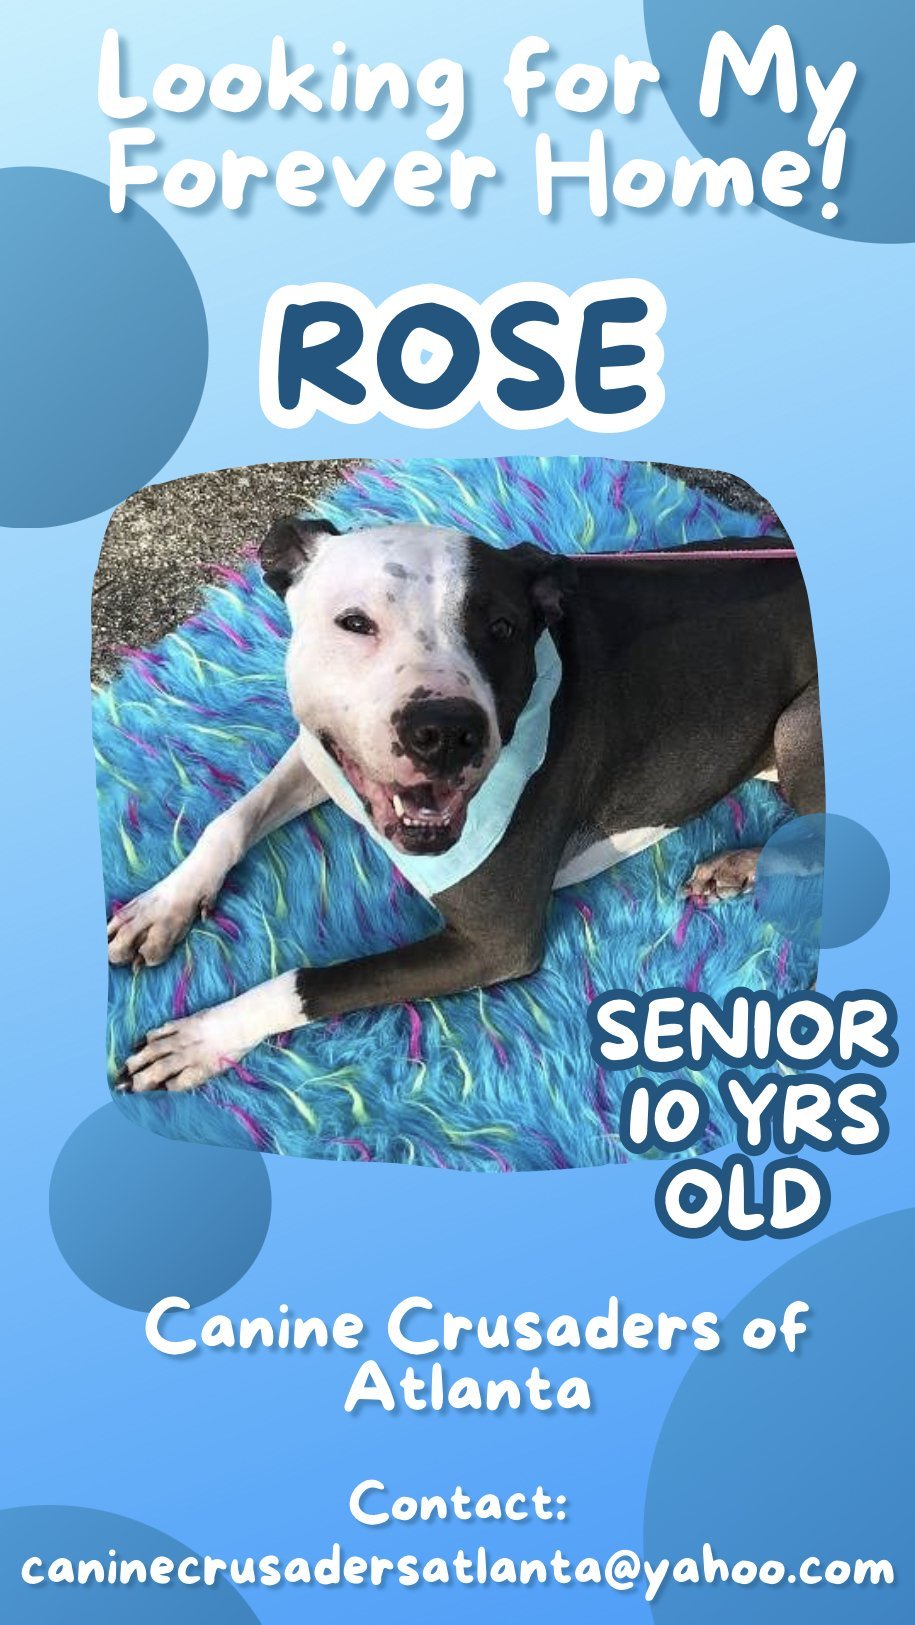 Rose - DOG AND KID FRIENDLY! LOVES ALL PEOPLE!